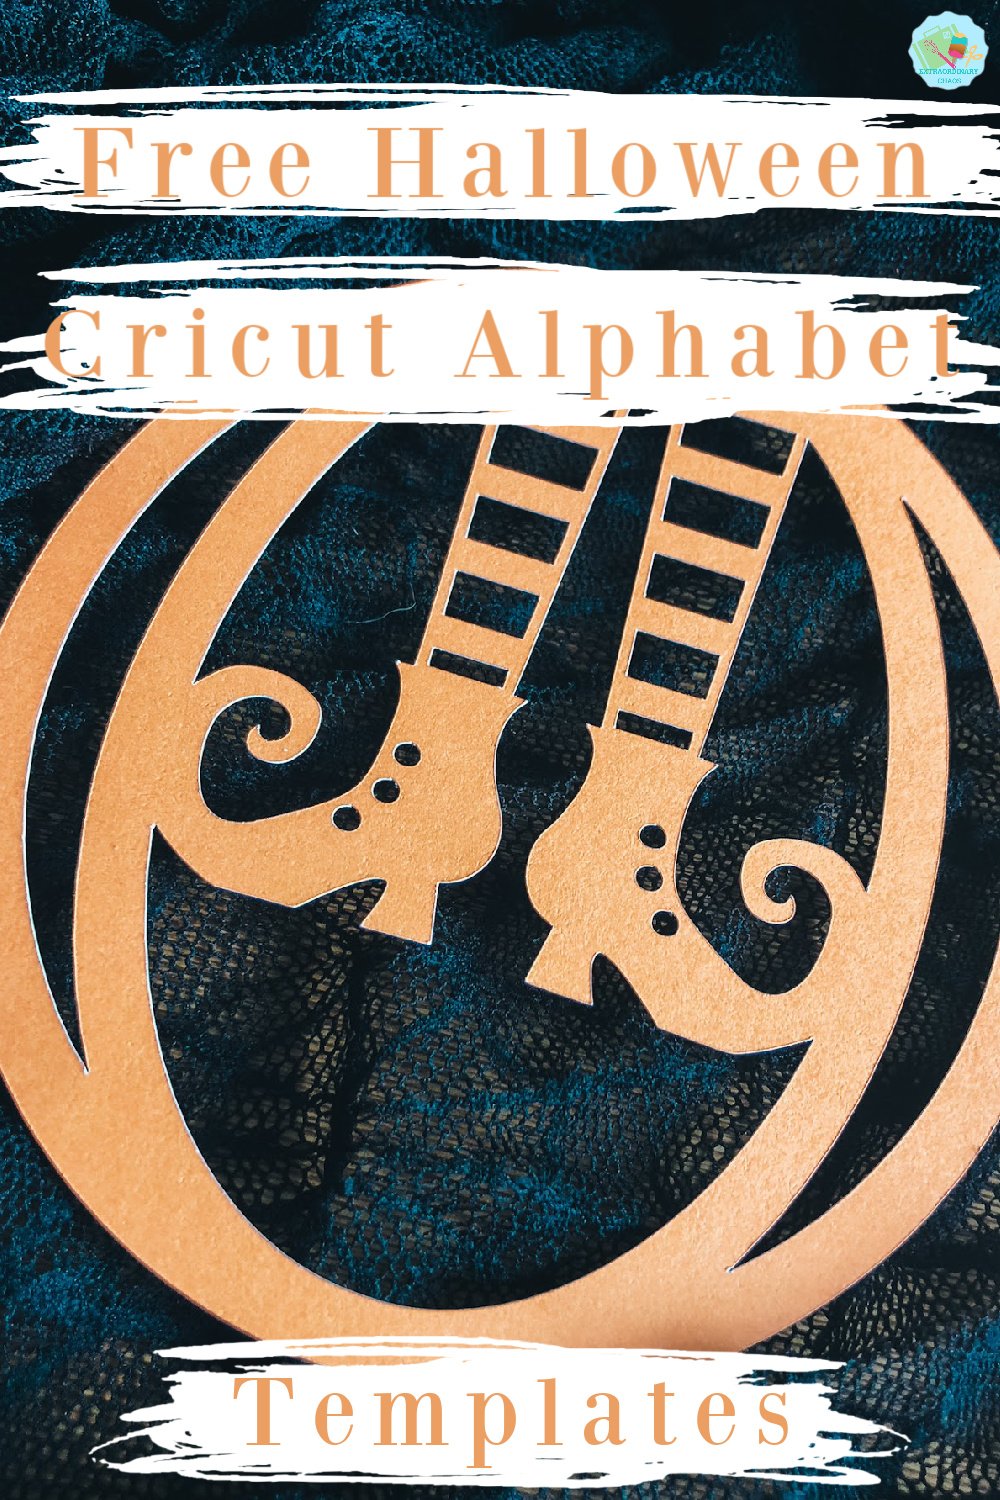 Free Cricut Halloween Alphabet Templates to make as gifts or Halloween Spooky home projects and to sell